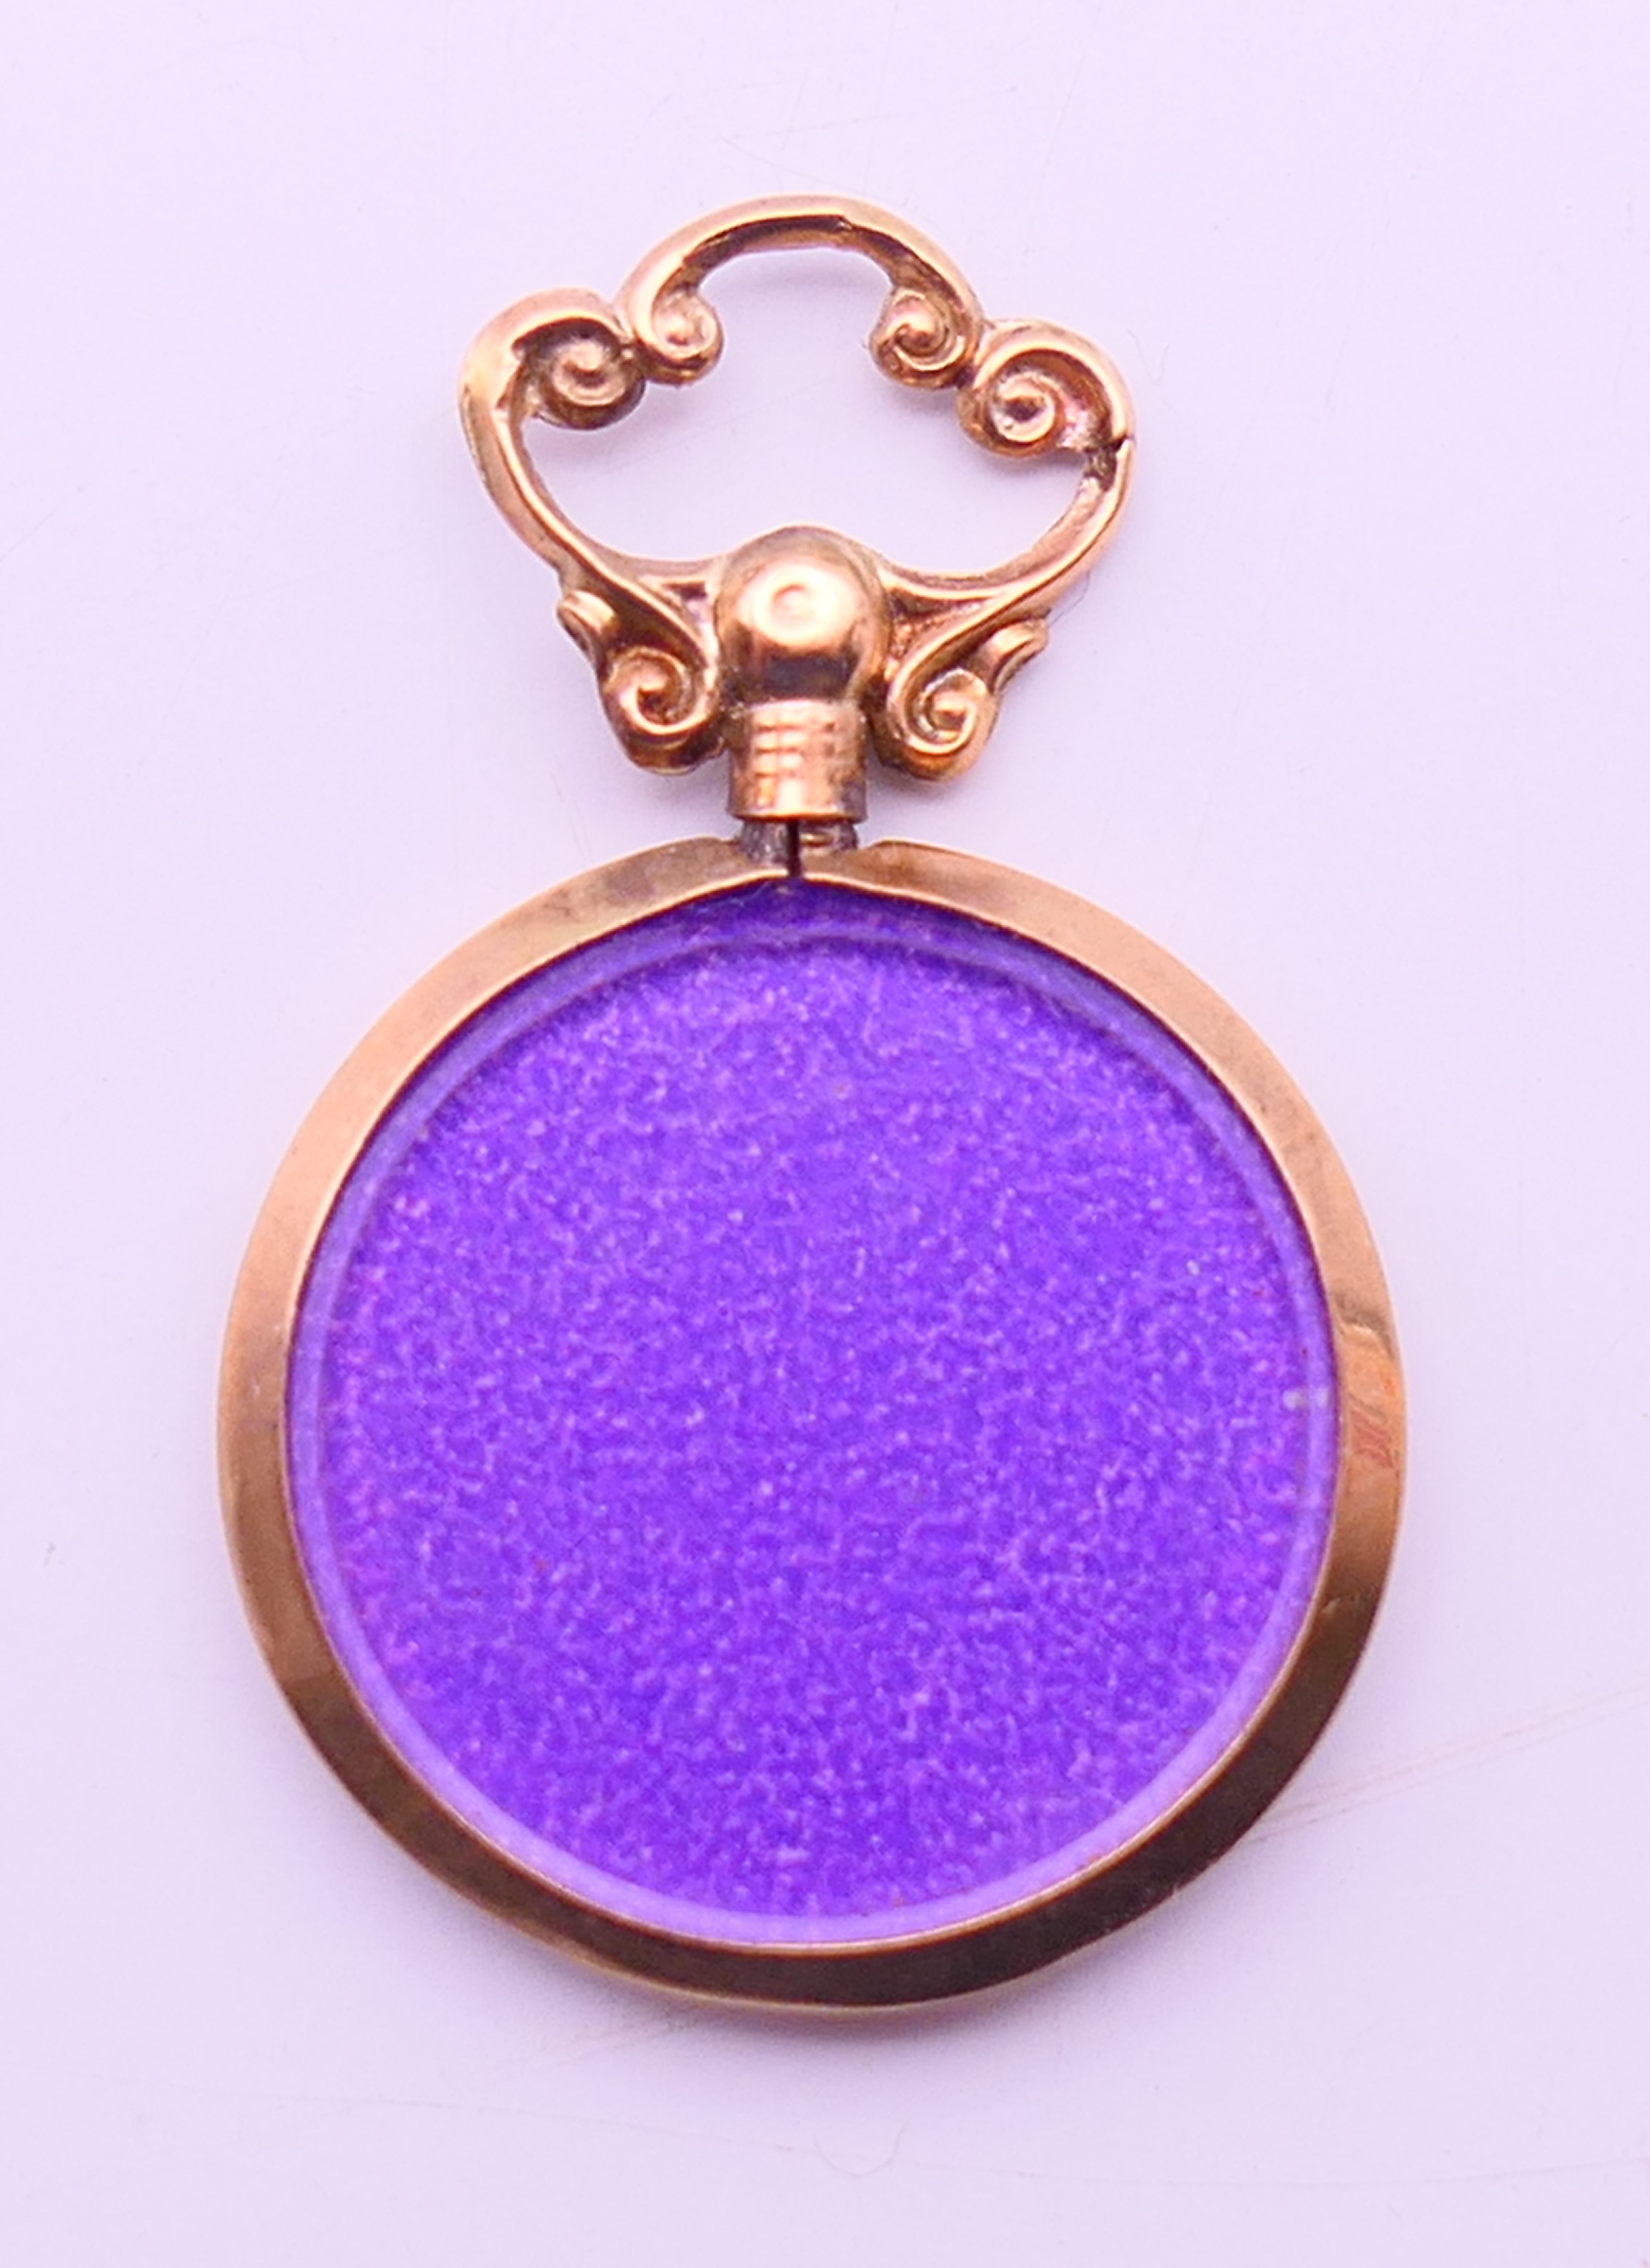 A 9 ct gold double photo locket pendant. 3.5 cm high including suspension loop.